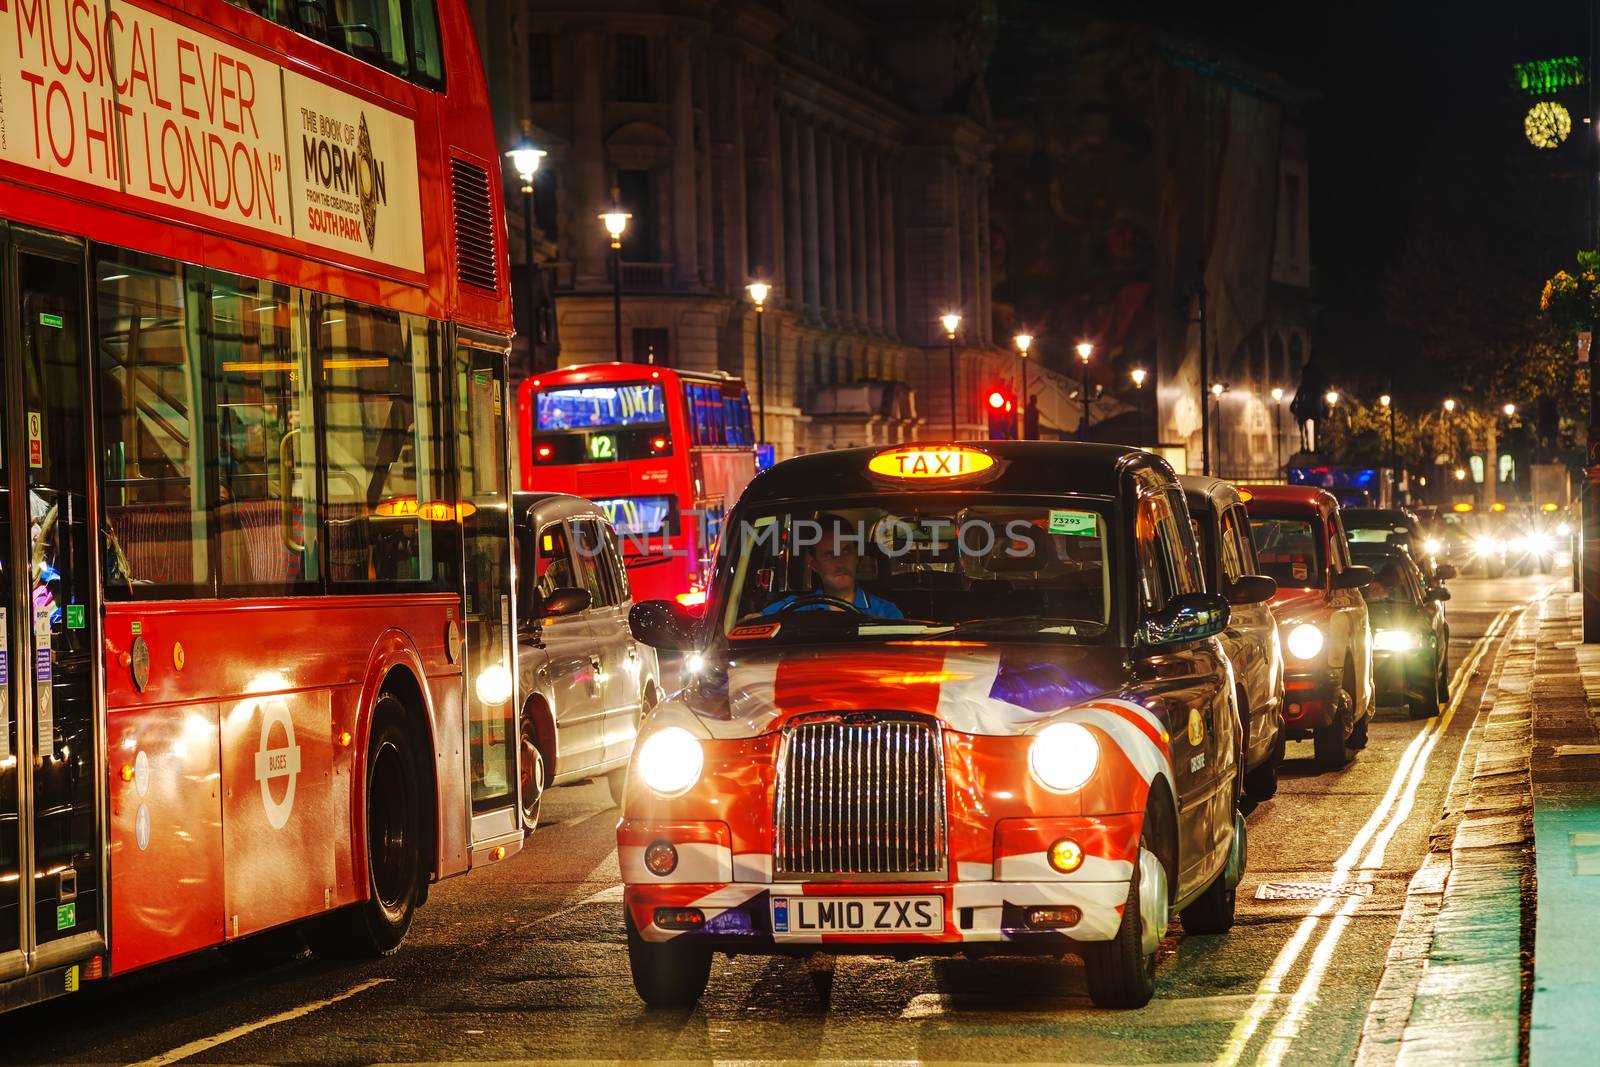 LONDON - APRIL 14: Famous taxi cab (hackney) on a street on April 14, 2015 in London, UK. A hackney or hackney carriage (also called a cab, black cab, hack or London taxi) is a carriage or automobile for hire.